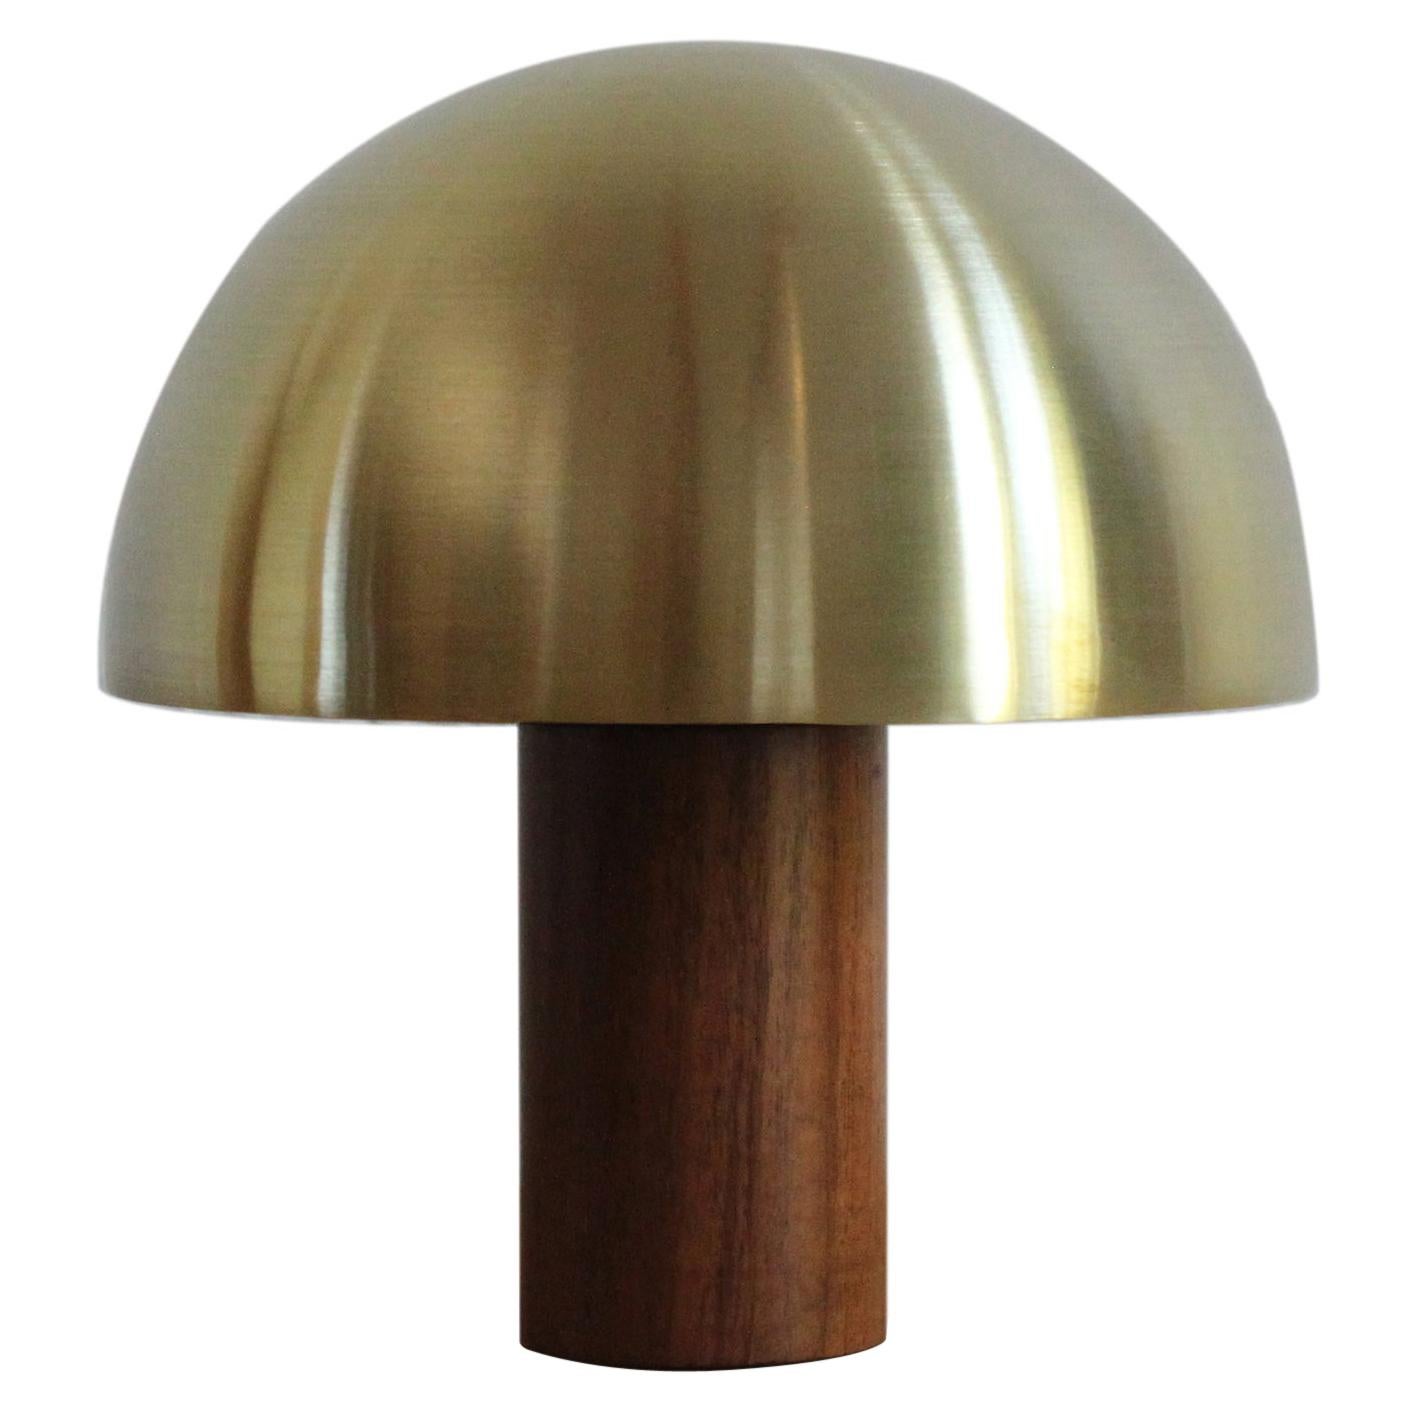 Acento Table Lamp by Maria Beckmann, Represented by Tuleste Factory For Sale